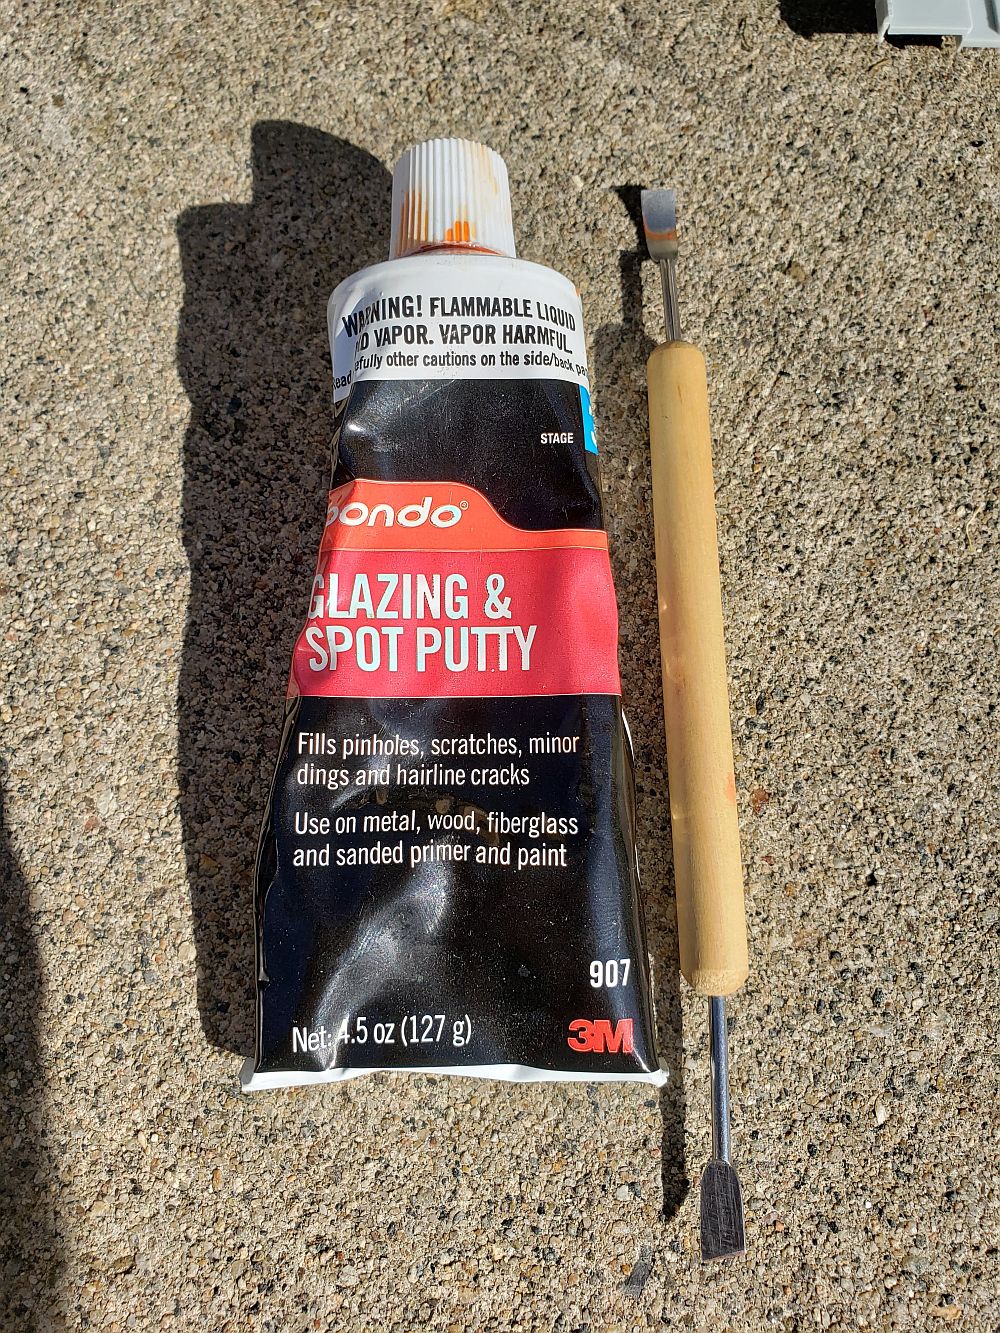 I am using Bondo spot putty as a light filler to fill in the deterioration  in the plastic around the window. This is the same material used to fill  pin